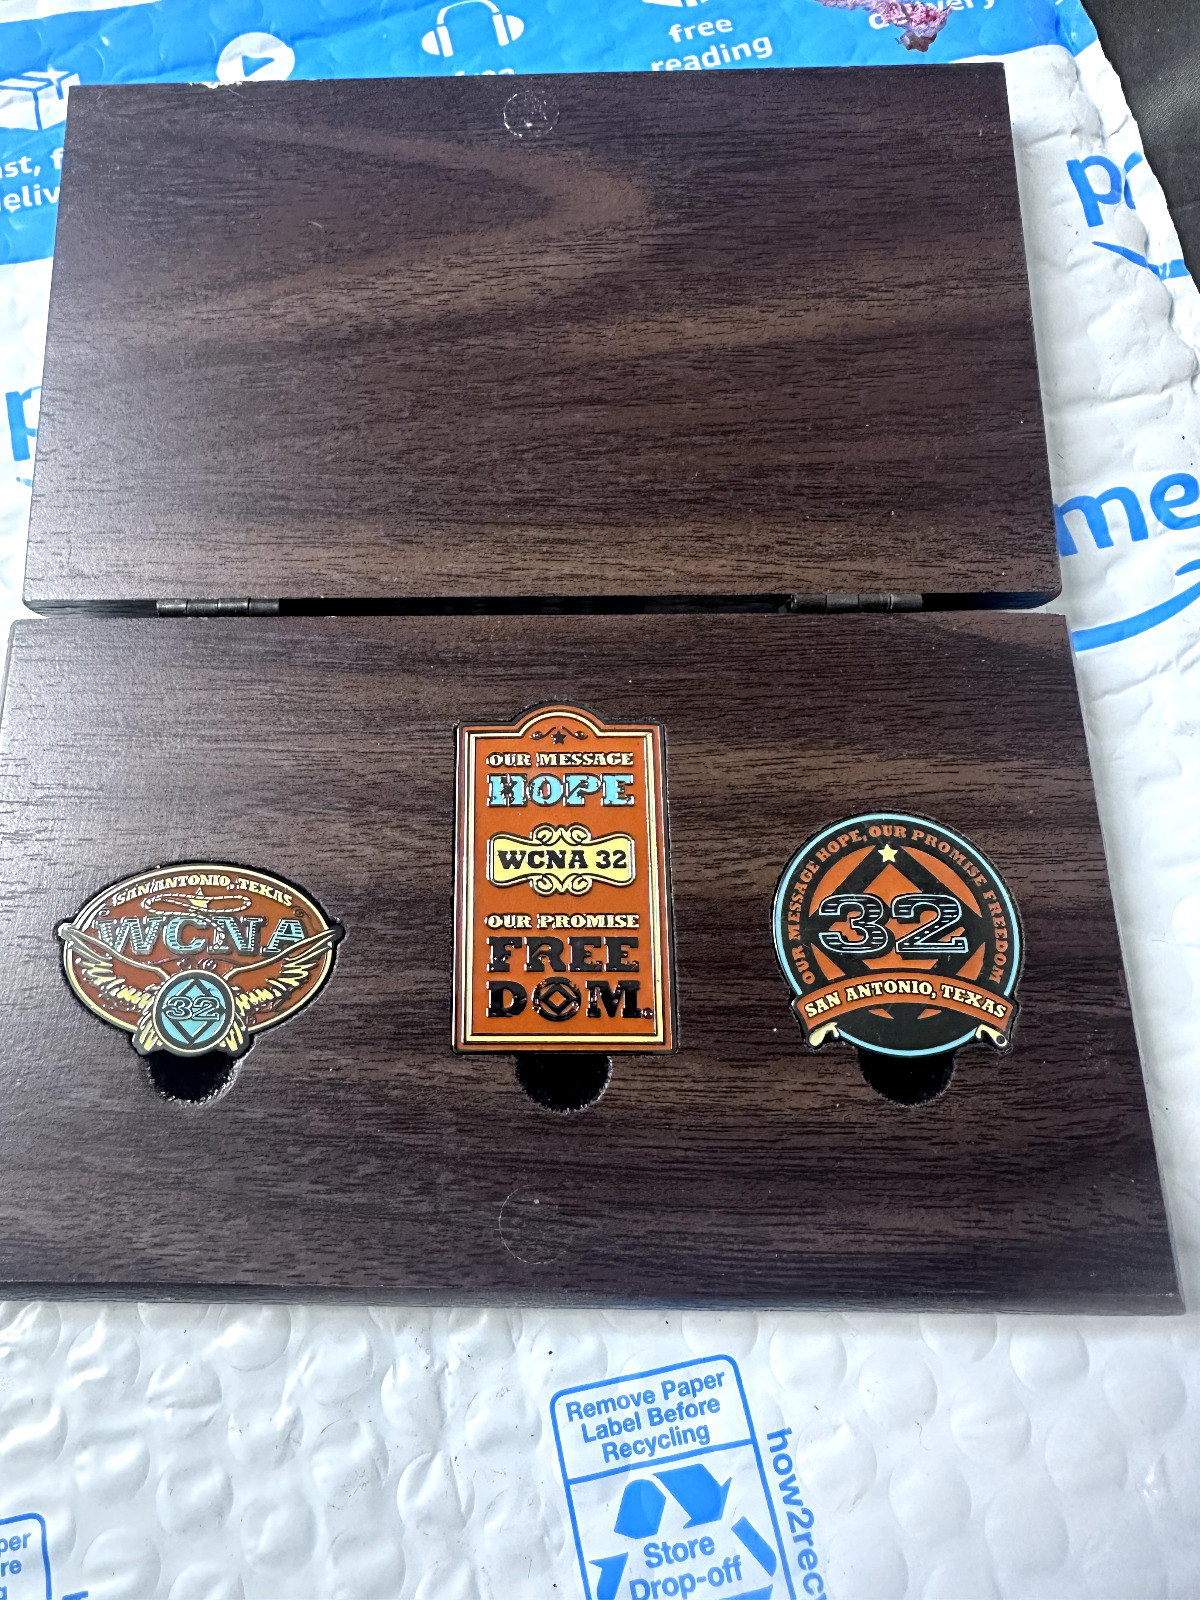 Narcotics Anonymous WCNA 32 Limited Edition Set Of 3 Pins In Wood Box See Detail